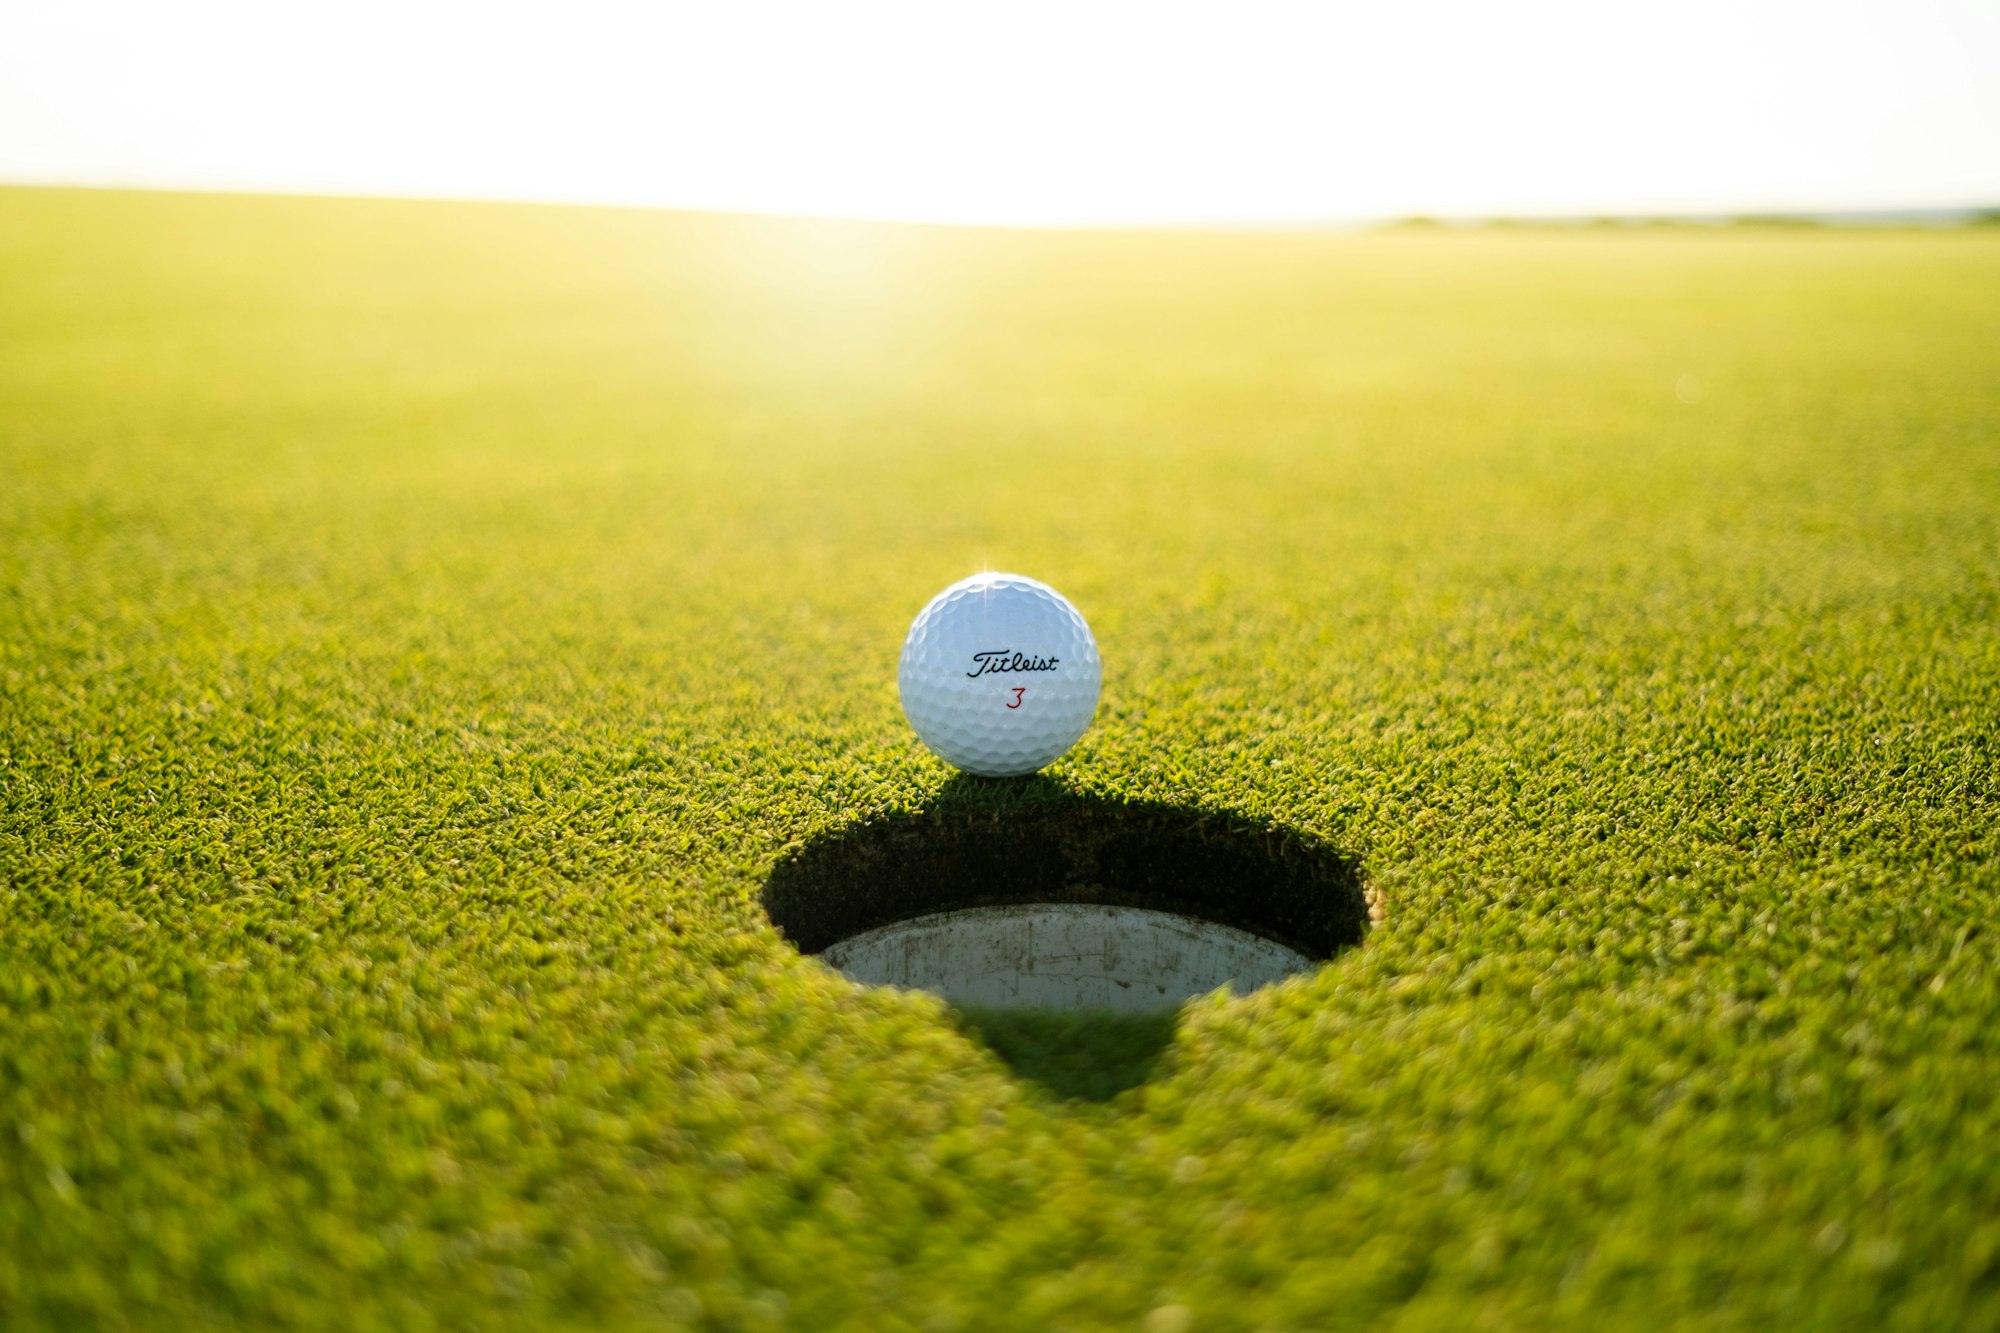 Titleist golf ball on green grass field during daytime - what is considered the best golf ball